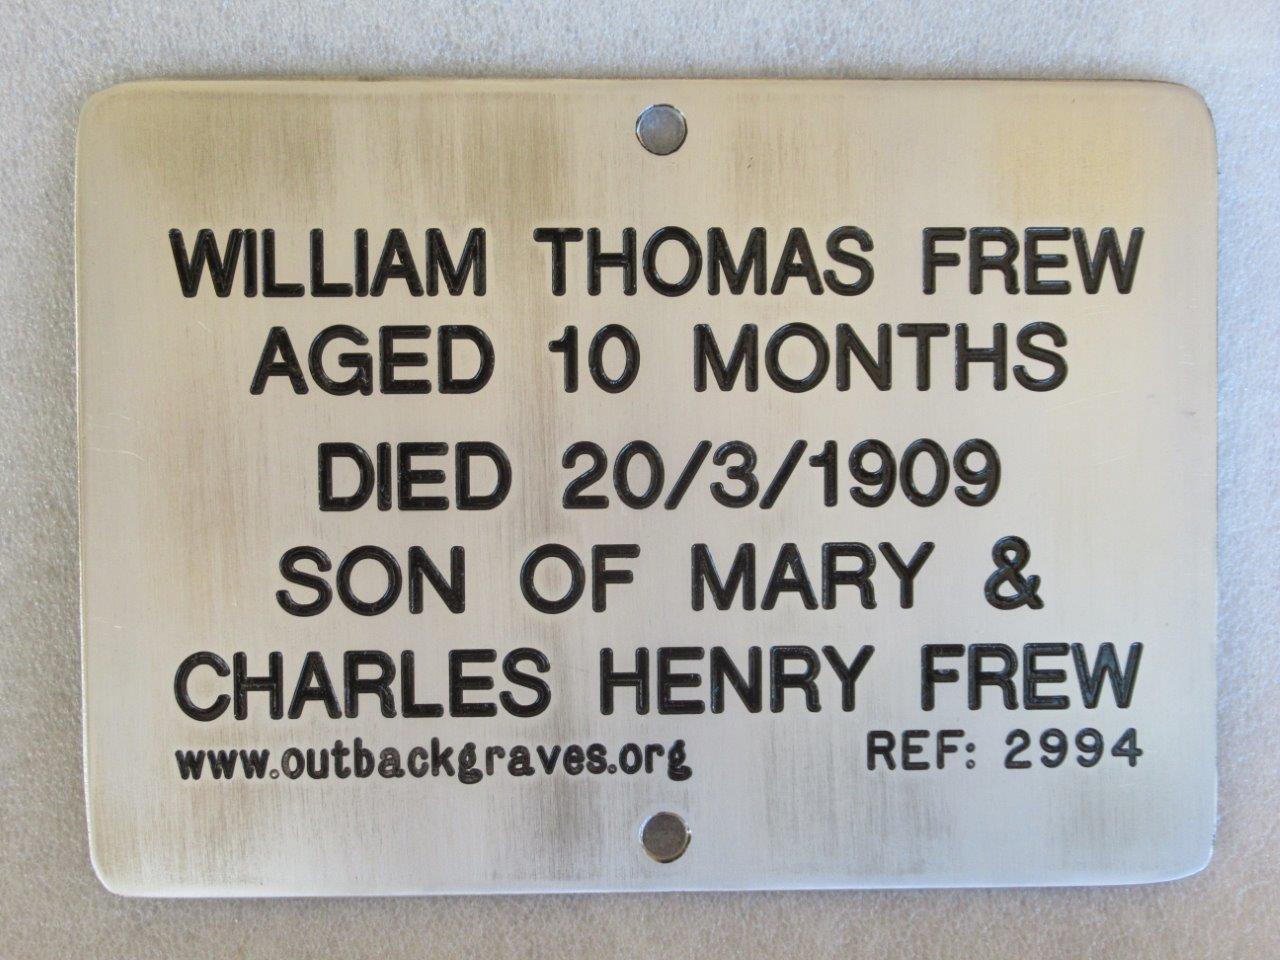 This is a photograph of plaque number 2994 for WILLIAM THOMAS FREW at Mt MORGANS